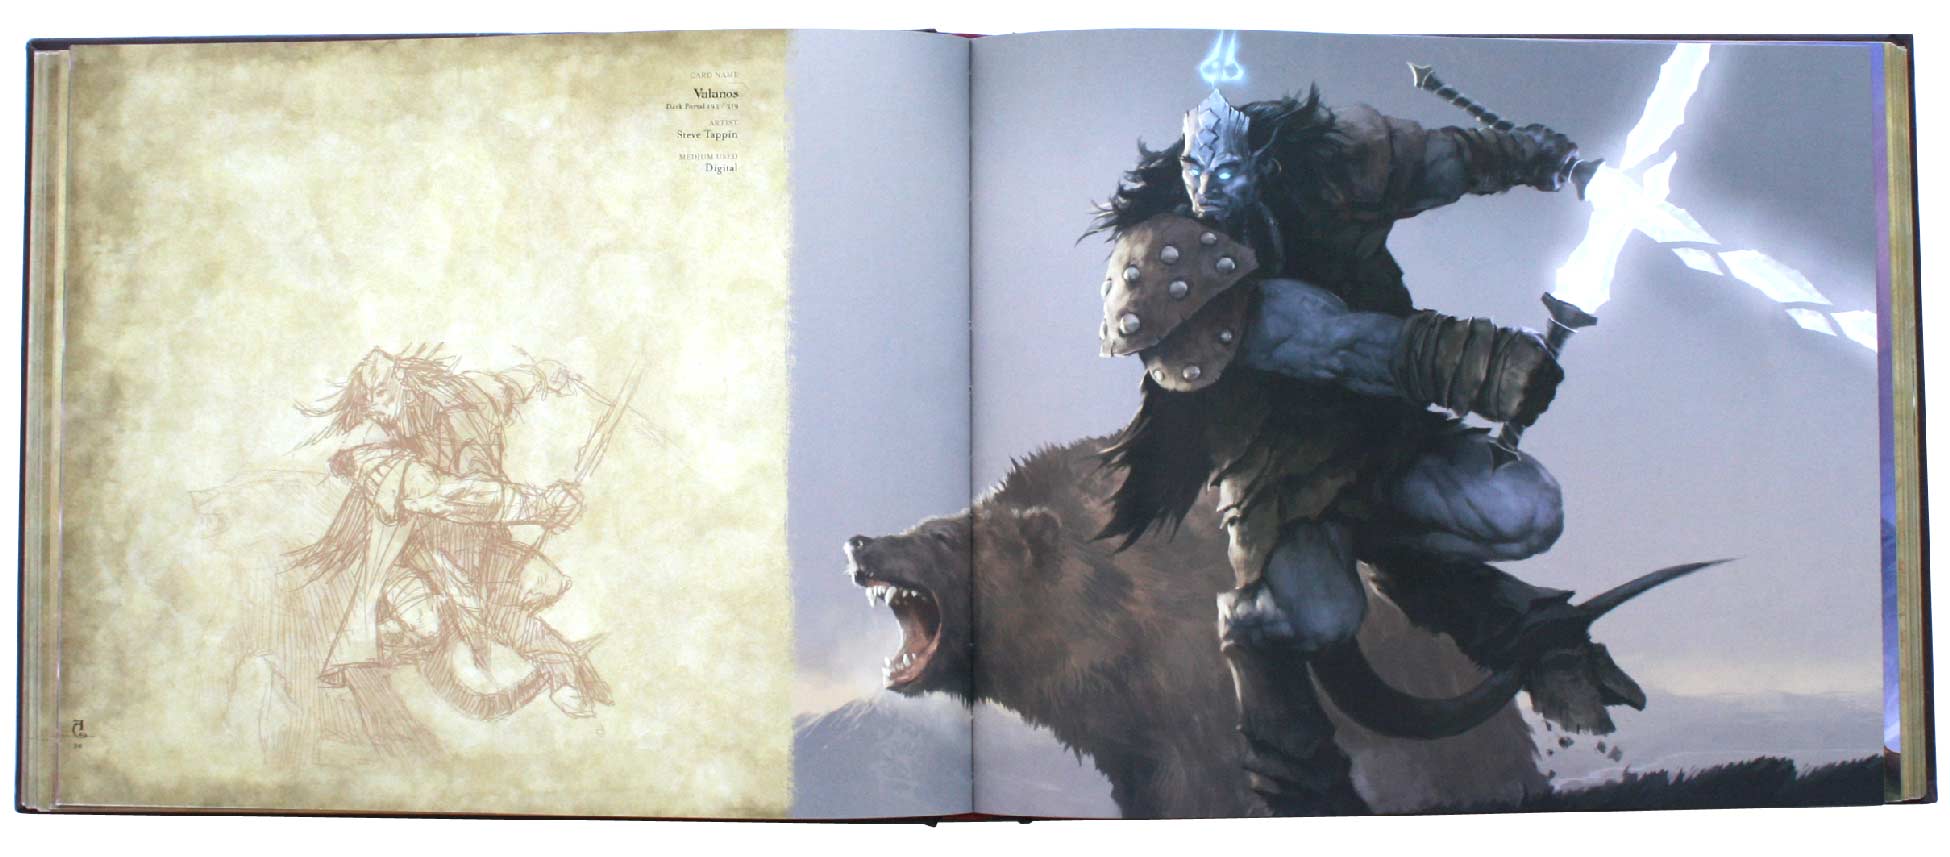 page 94 et 95 de l'art book : The Art of the Trading Card Game (World of Wacraft)